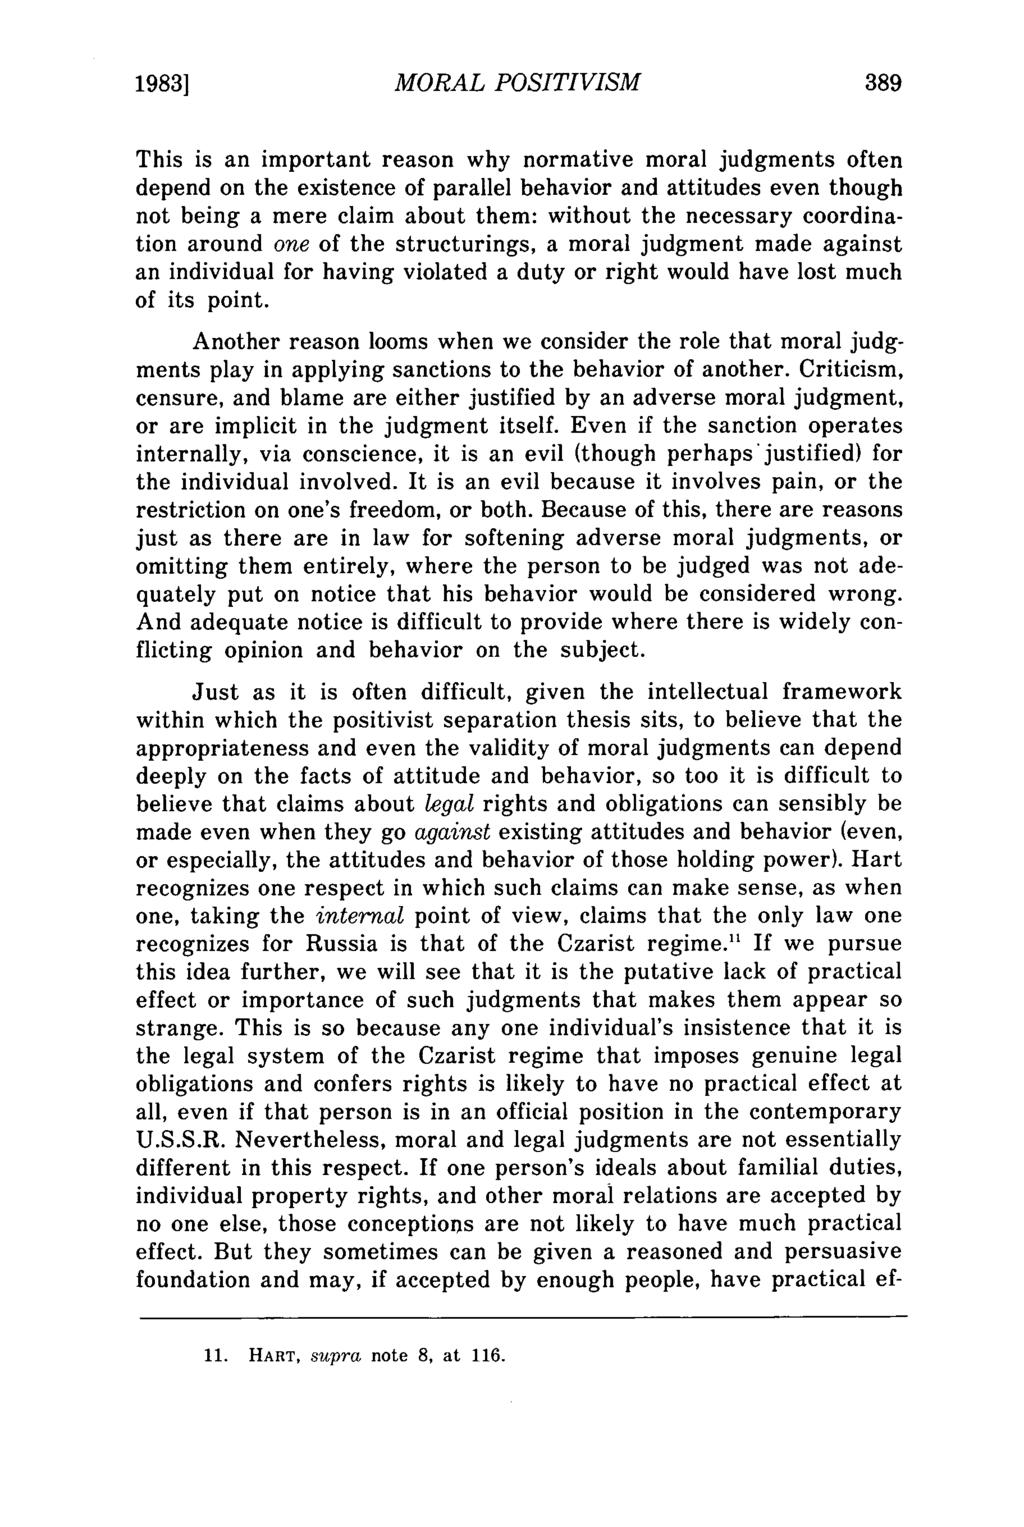 19831 Johnson: Moral Positivism and the Internal Legality of Morals MORAL POSITIVISM This is an important reason why normative moral judgments often depend on the existence of parallel behavior and